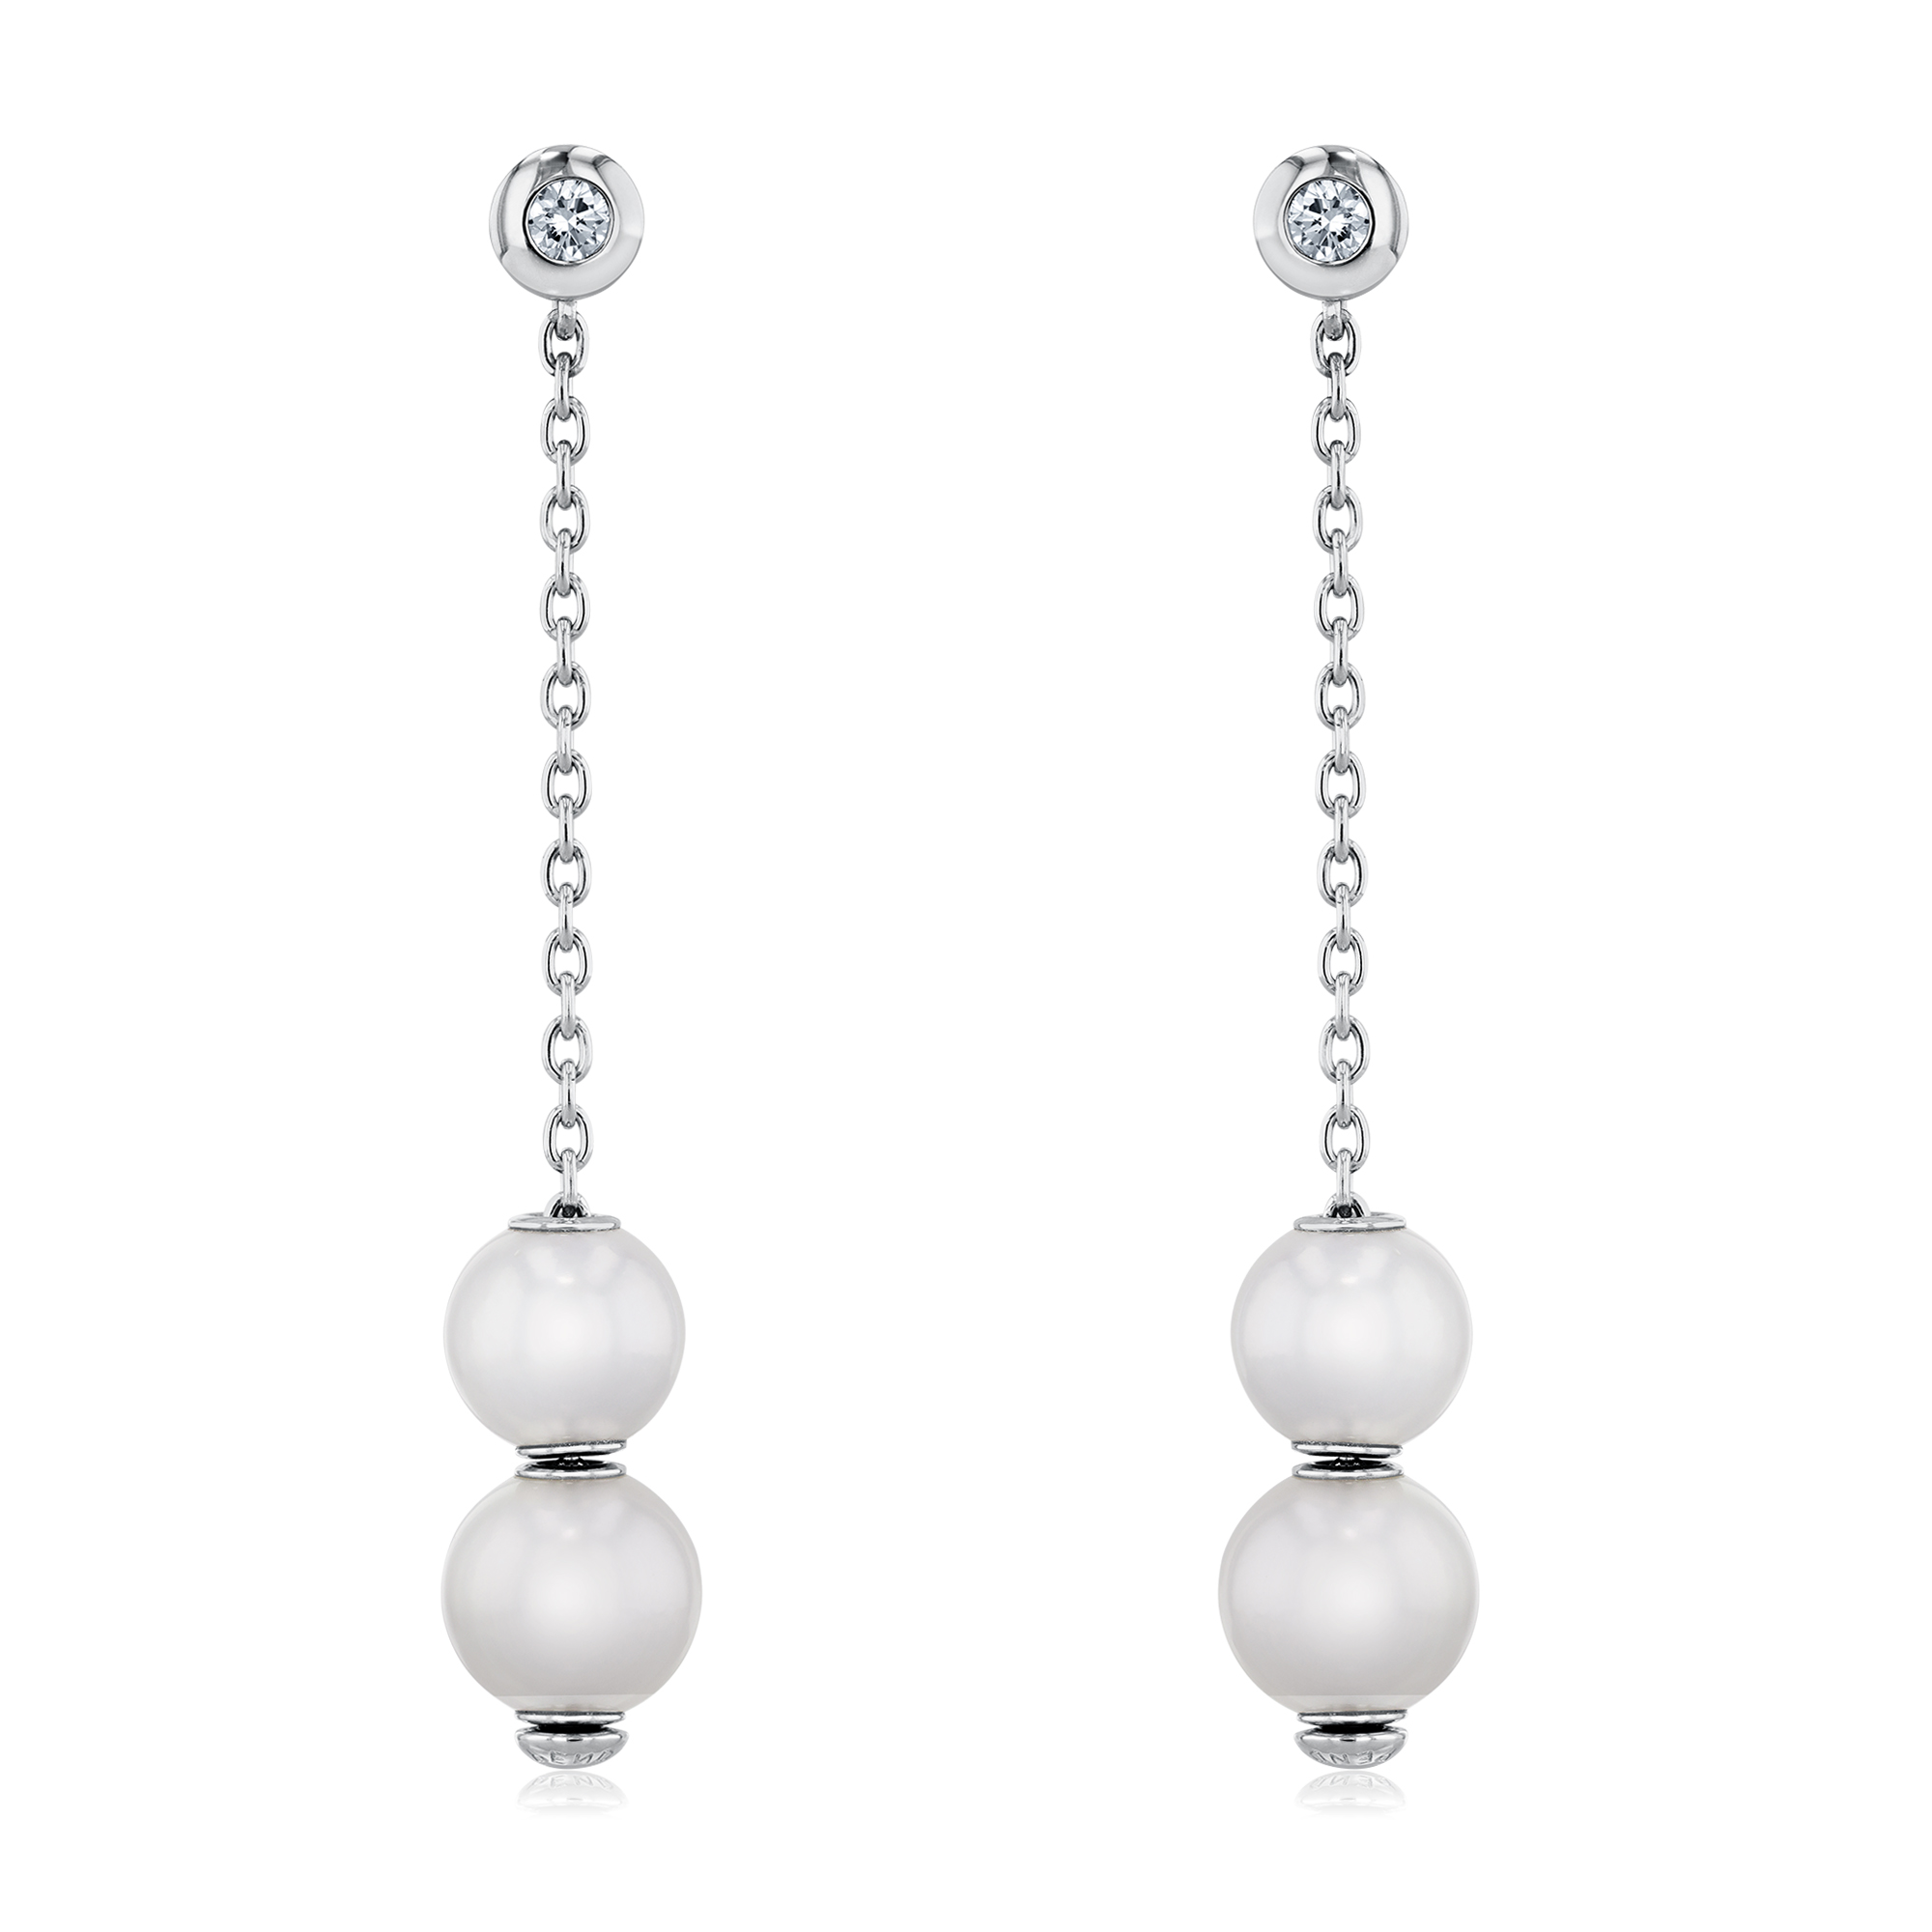 MIKIMOTO Akoya Cultured Pearls in Motion Earrings